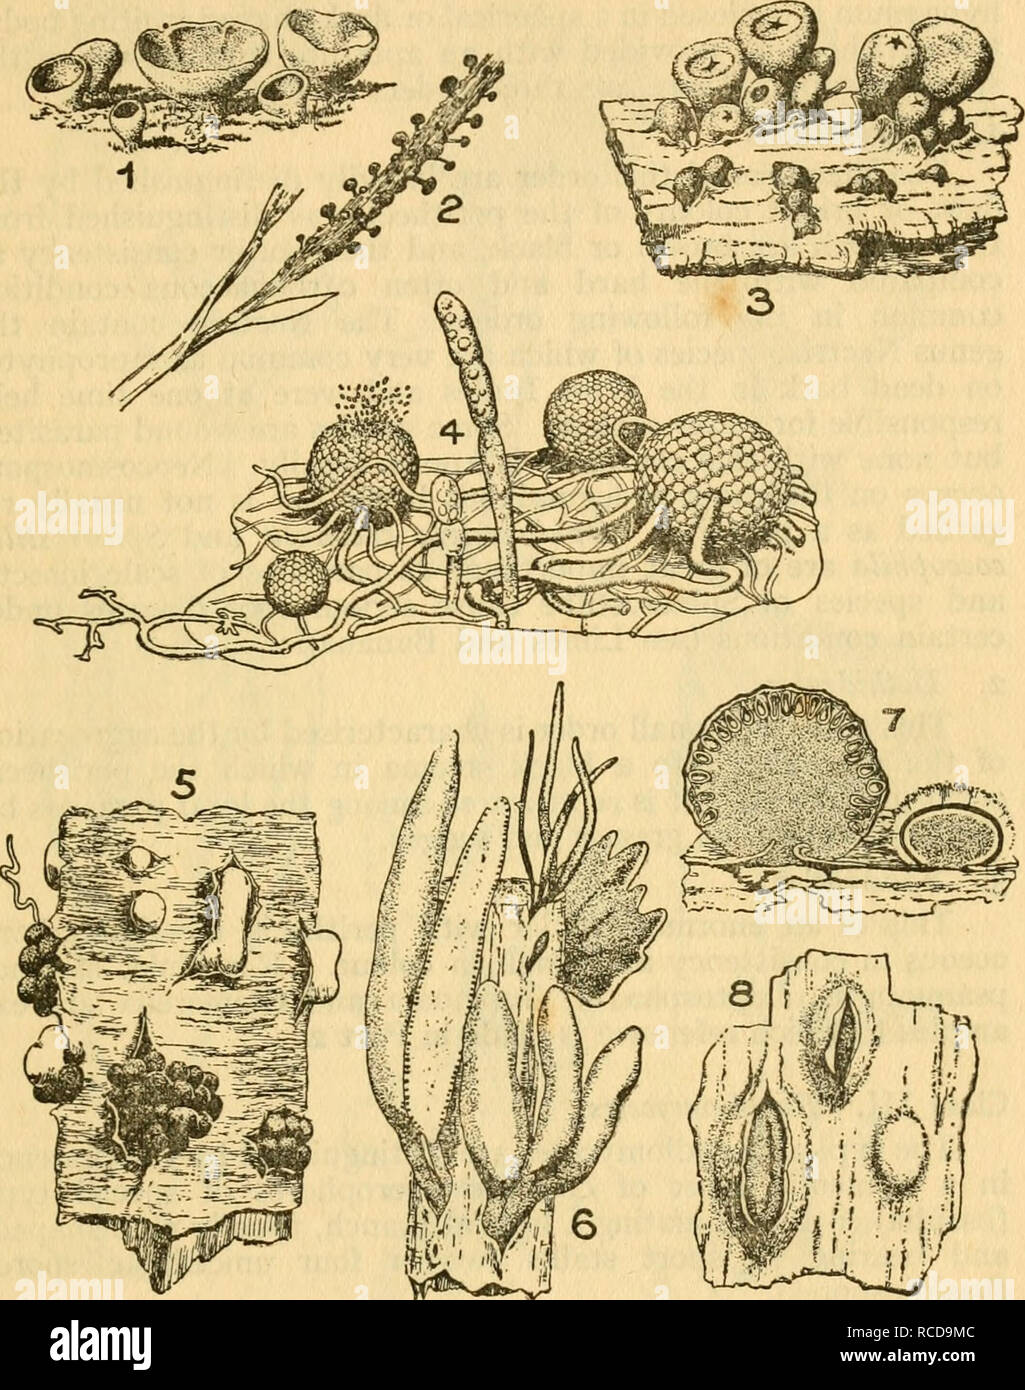 . Diseases of crop-plants in the Lesser Antilles. Tropical plants; Plant diseases. DISEASES CAUSED BY FUNGI 37 proper (Euascomycetes) contain an enormous number of species, a fair number of which are plant parasites. The Erysiphaceae or powdery mildews (see p 20) and the. W'^. Fig. 8 ASCOMYCETES 1. Peziza. 2. Balansia trinitensis. 3. Scleroderris. 4. Perithecia and Conidia of an Erysiphe. 5. Nectria 6. Xylaria. 7. Hypoxylon. 8. Pseudovalsa. From Engler &amp; Prantl. Nat. Pflanz. Perisporiacese (which include the fungi of &quot;black blight&quot;) have mycelium which is superficial on the host  Stock Photo